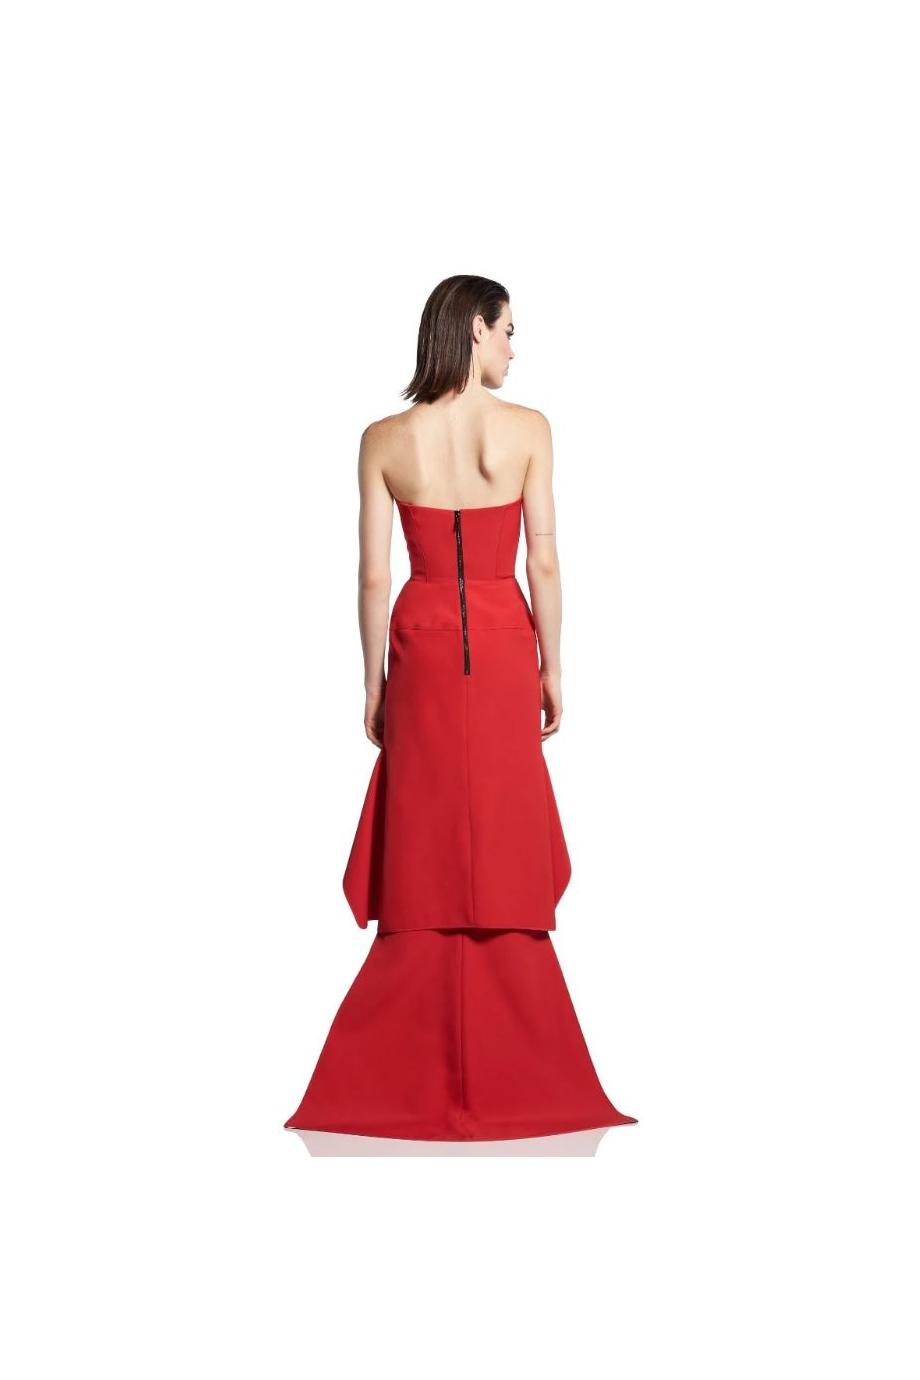 Aprise crepe gown